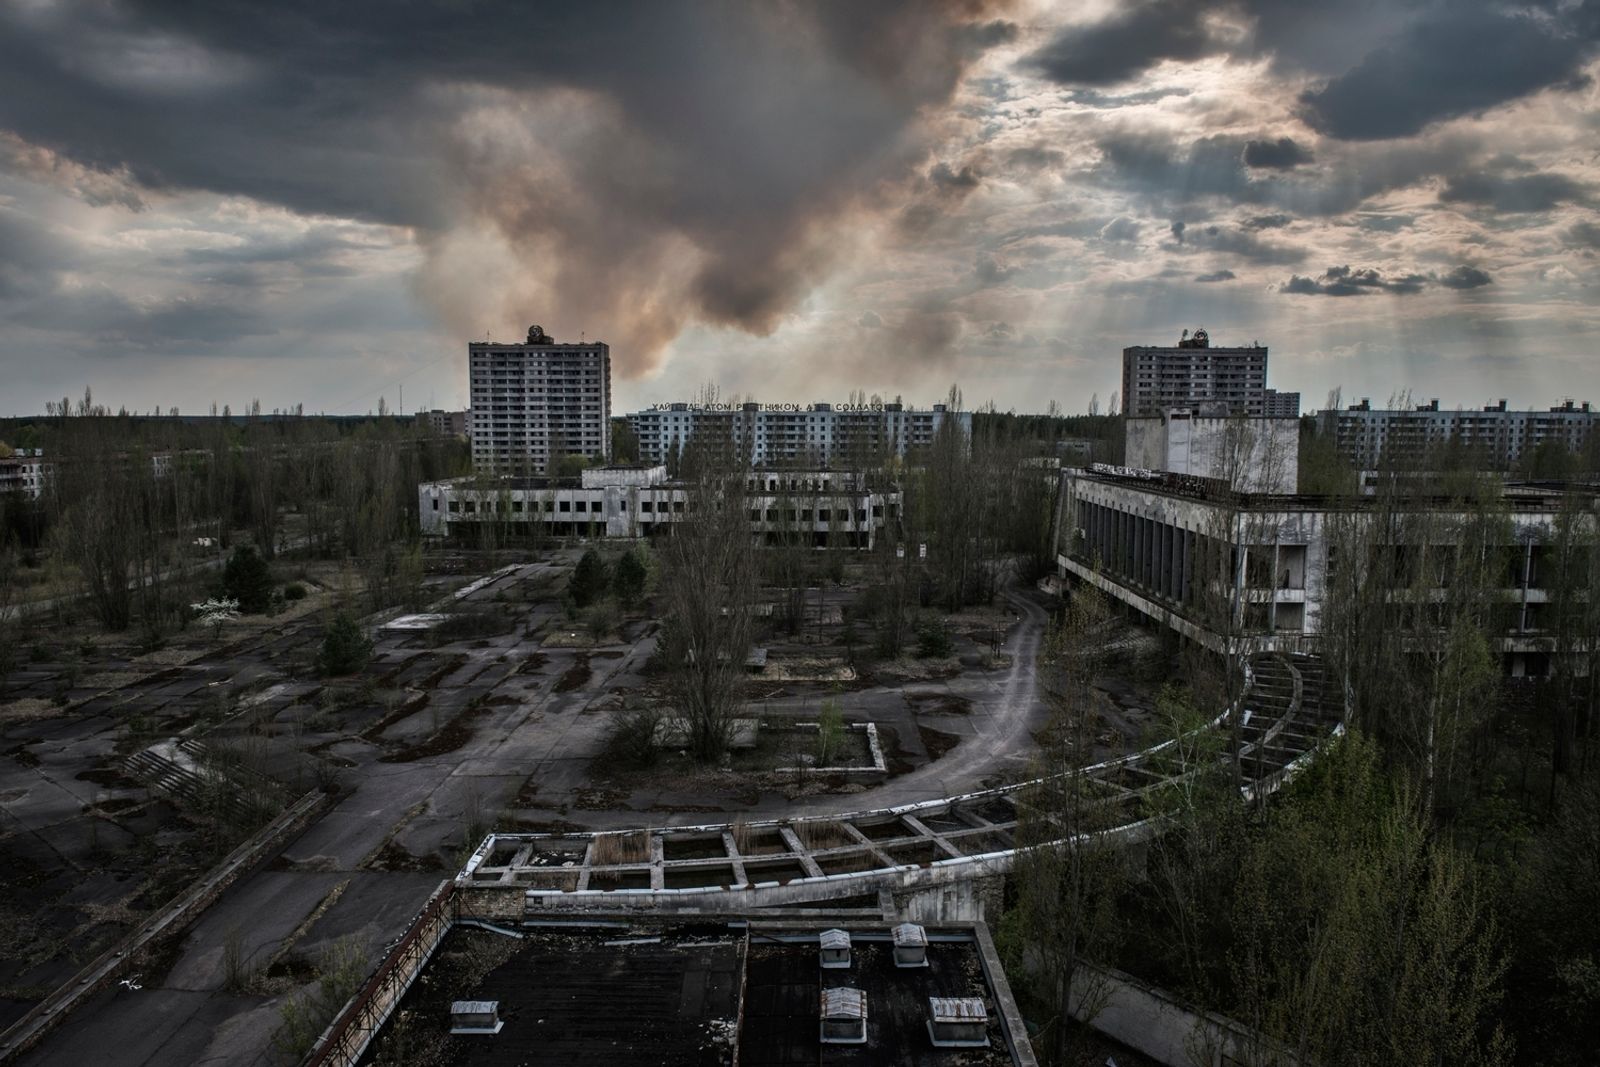 © Pierpaolo Mittica - Image from the Chernobyl 30 years after photography project